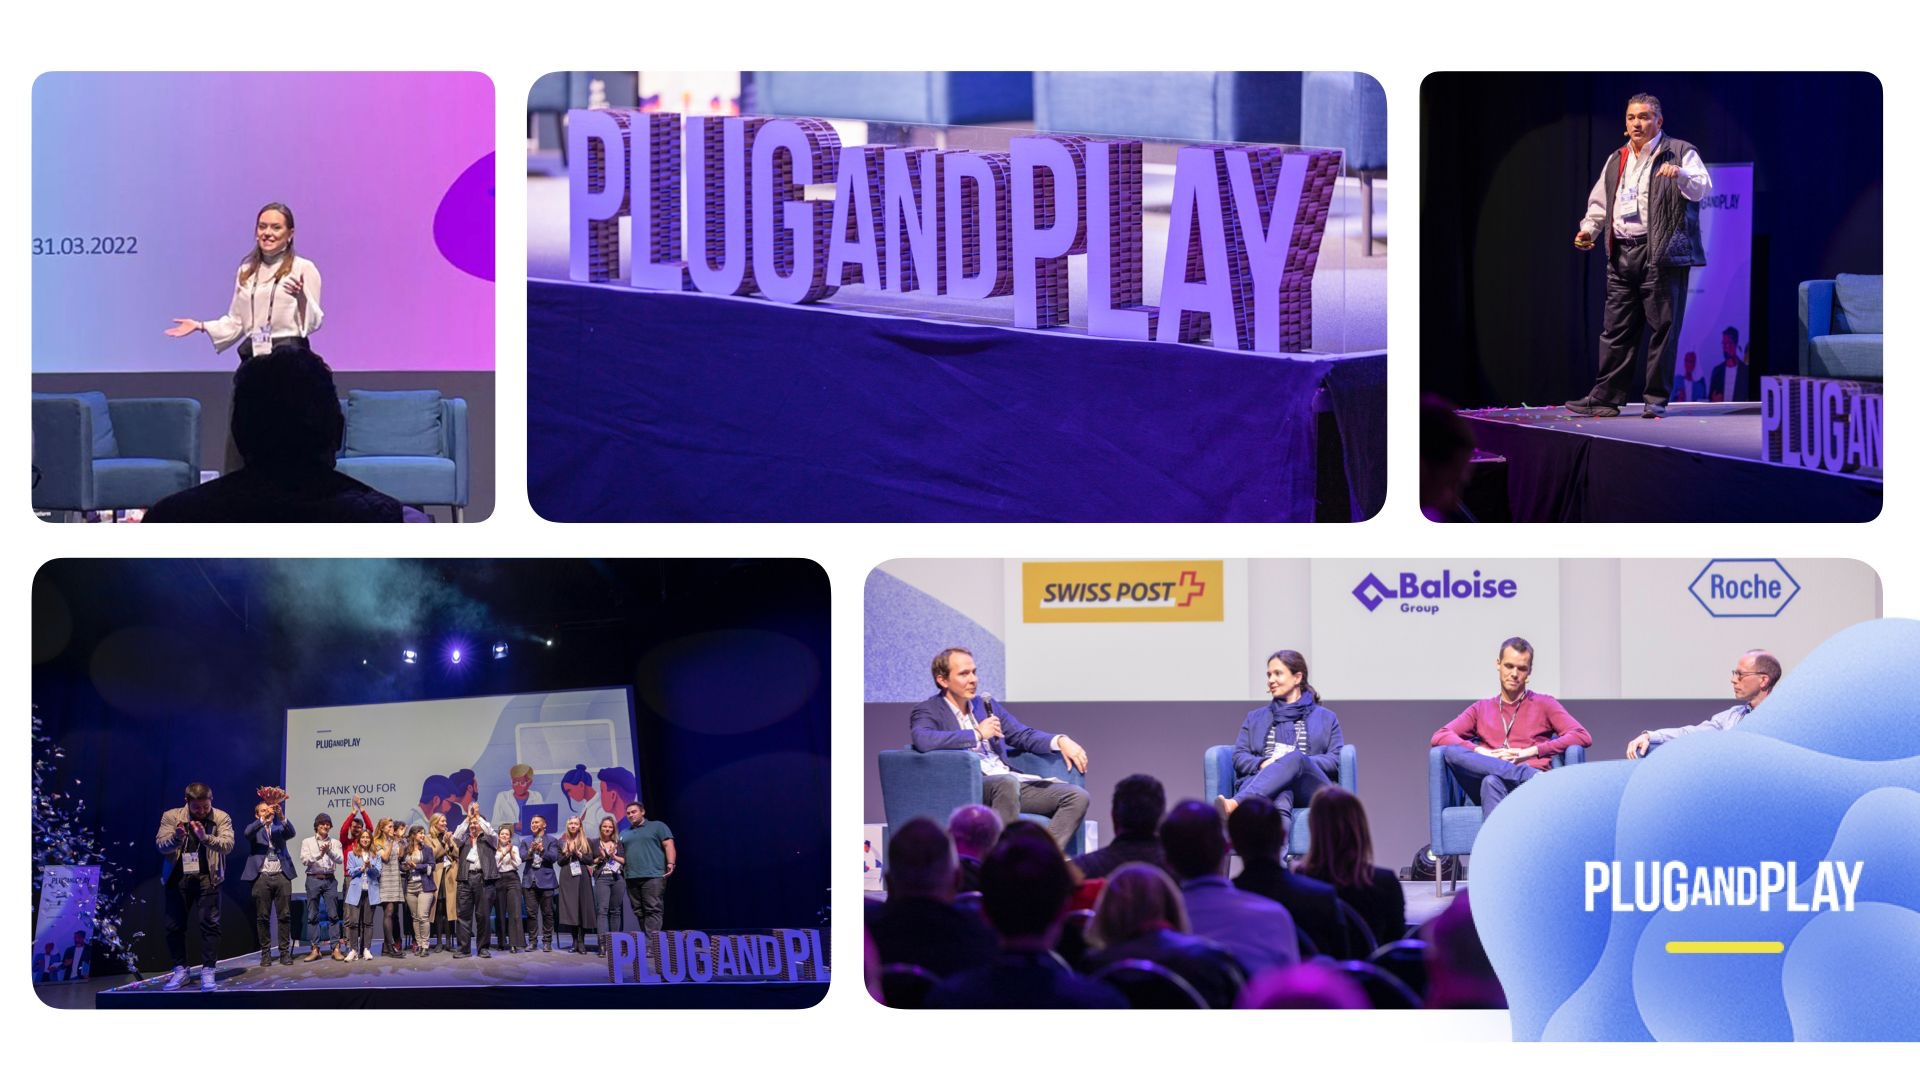 Plug and play Basel welcomes its first cohort